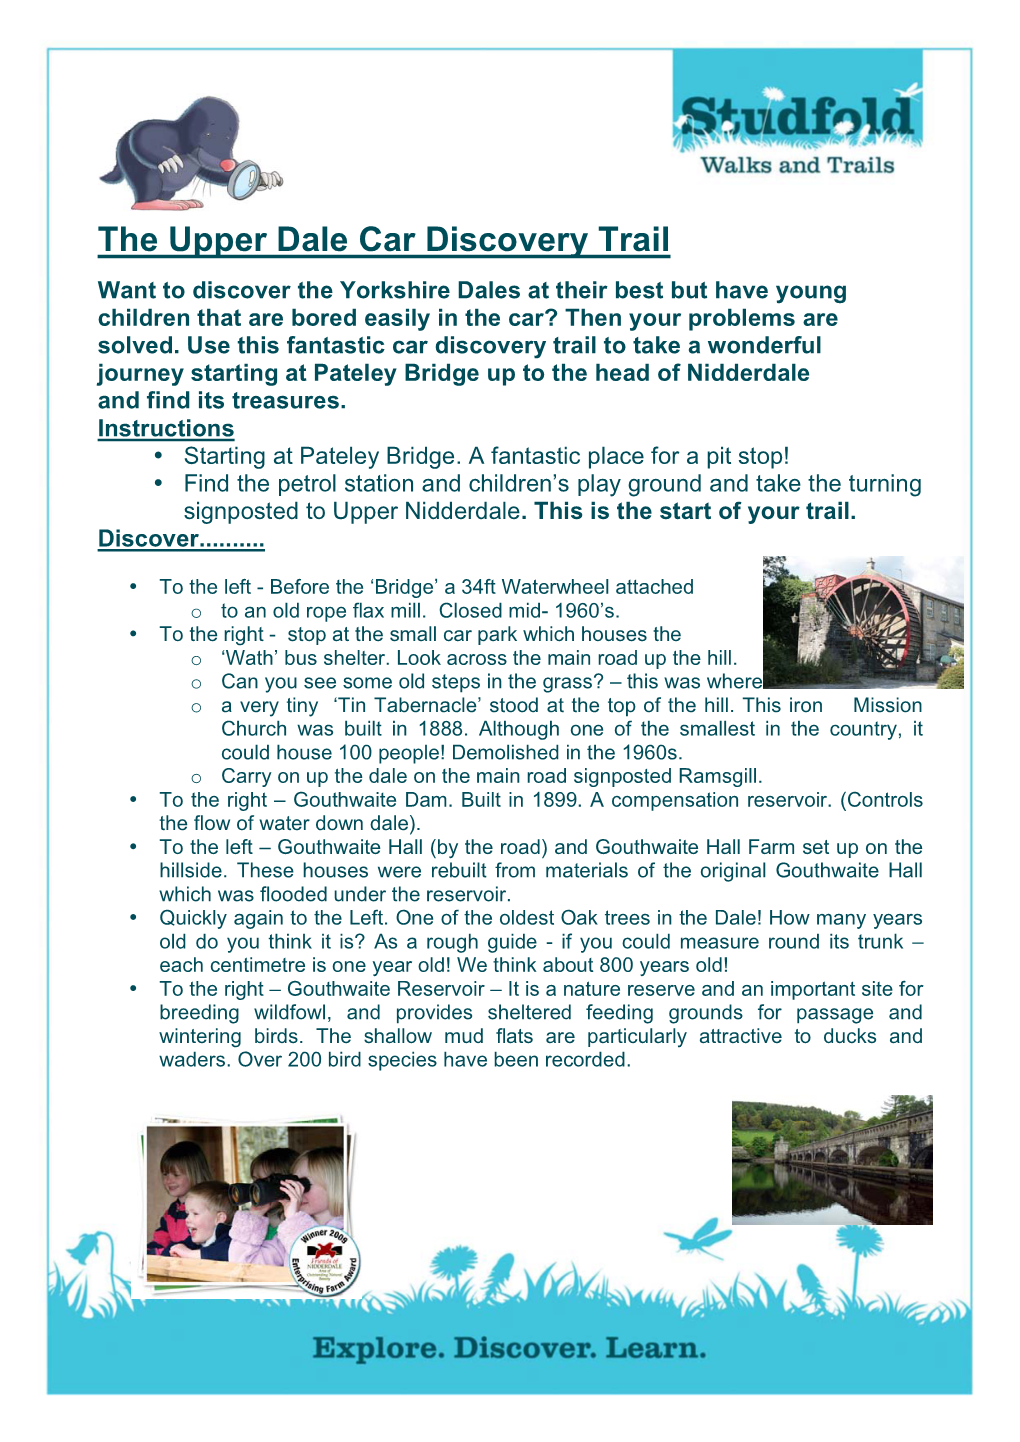 The Upper Dale Car Discovery Trail